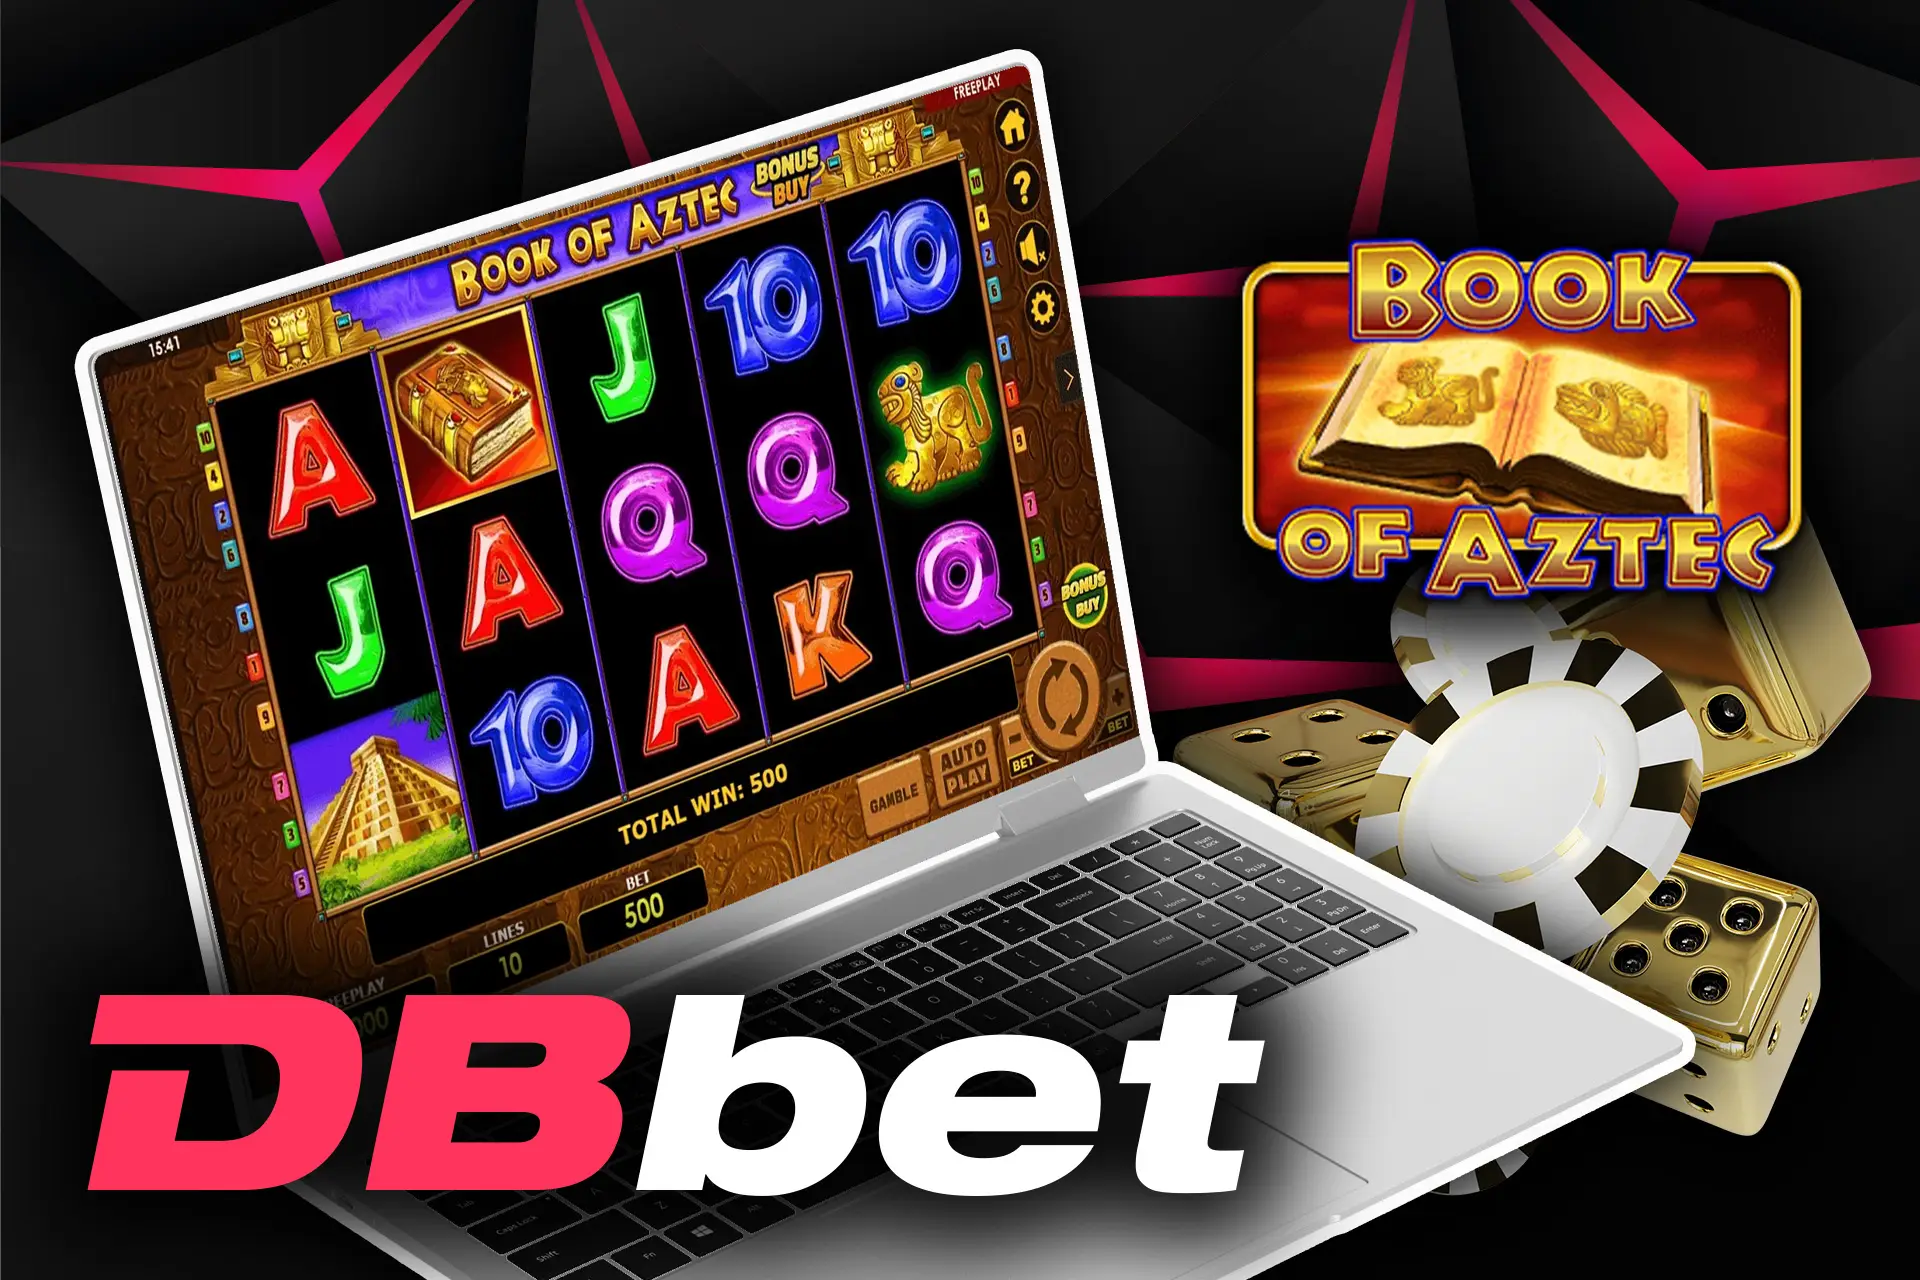 Play Book of Aztec on DBbet.